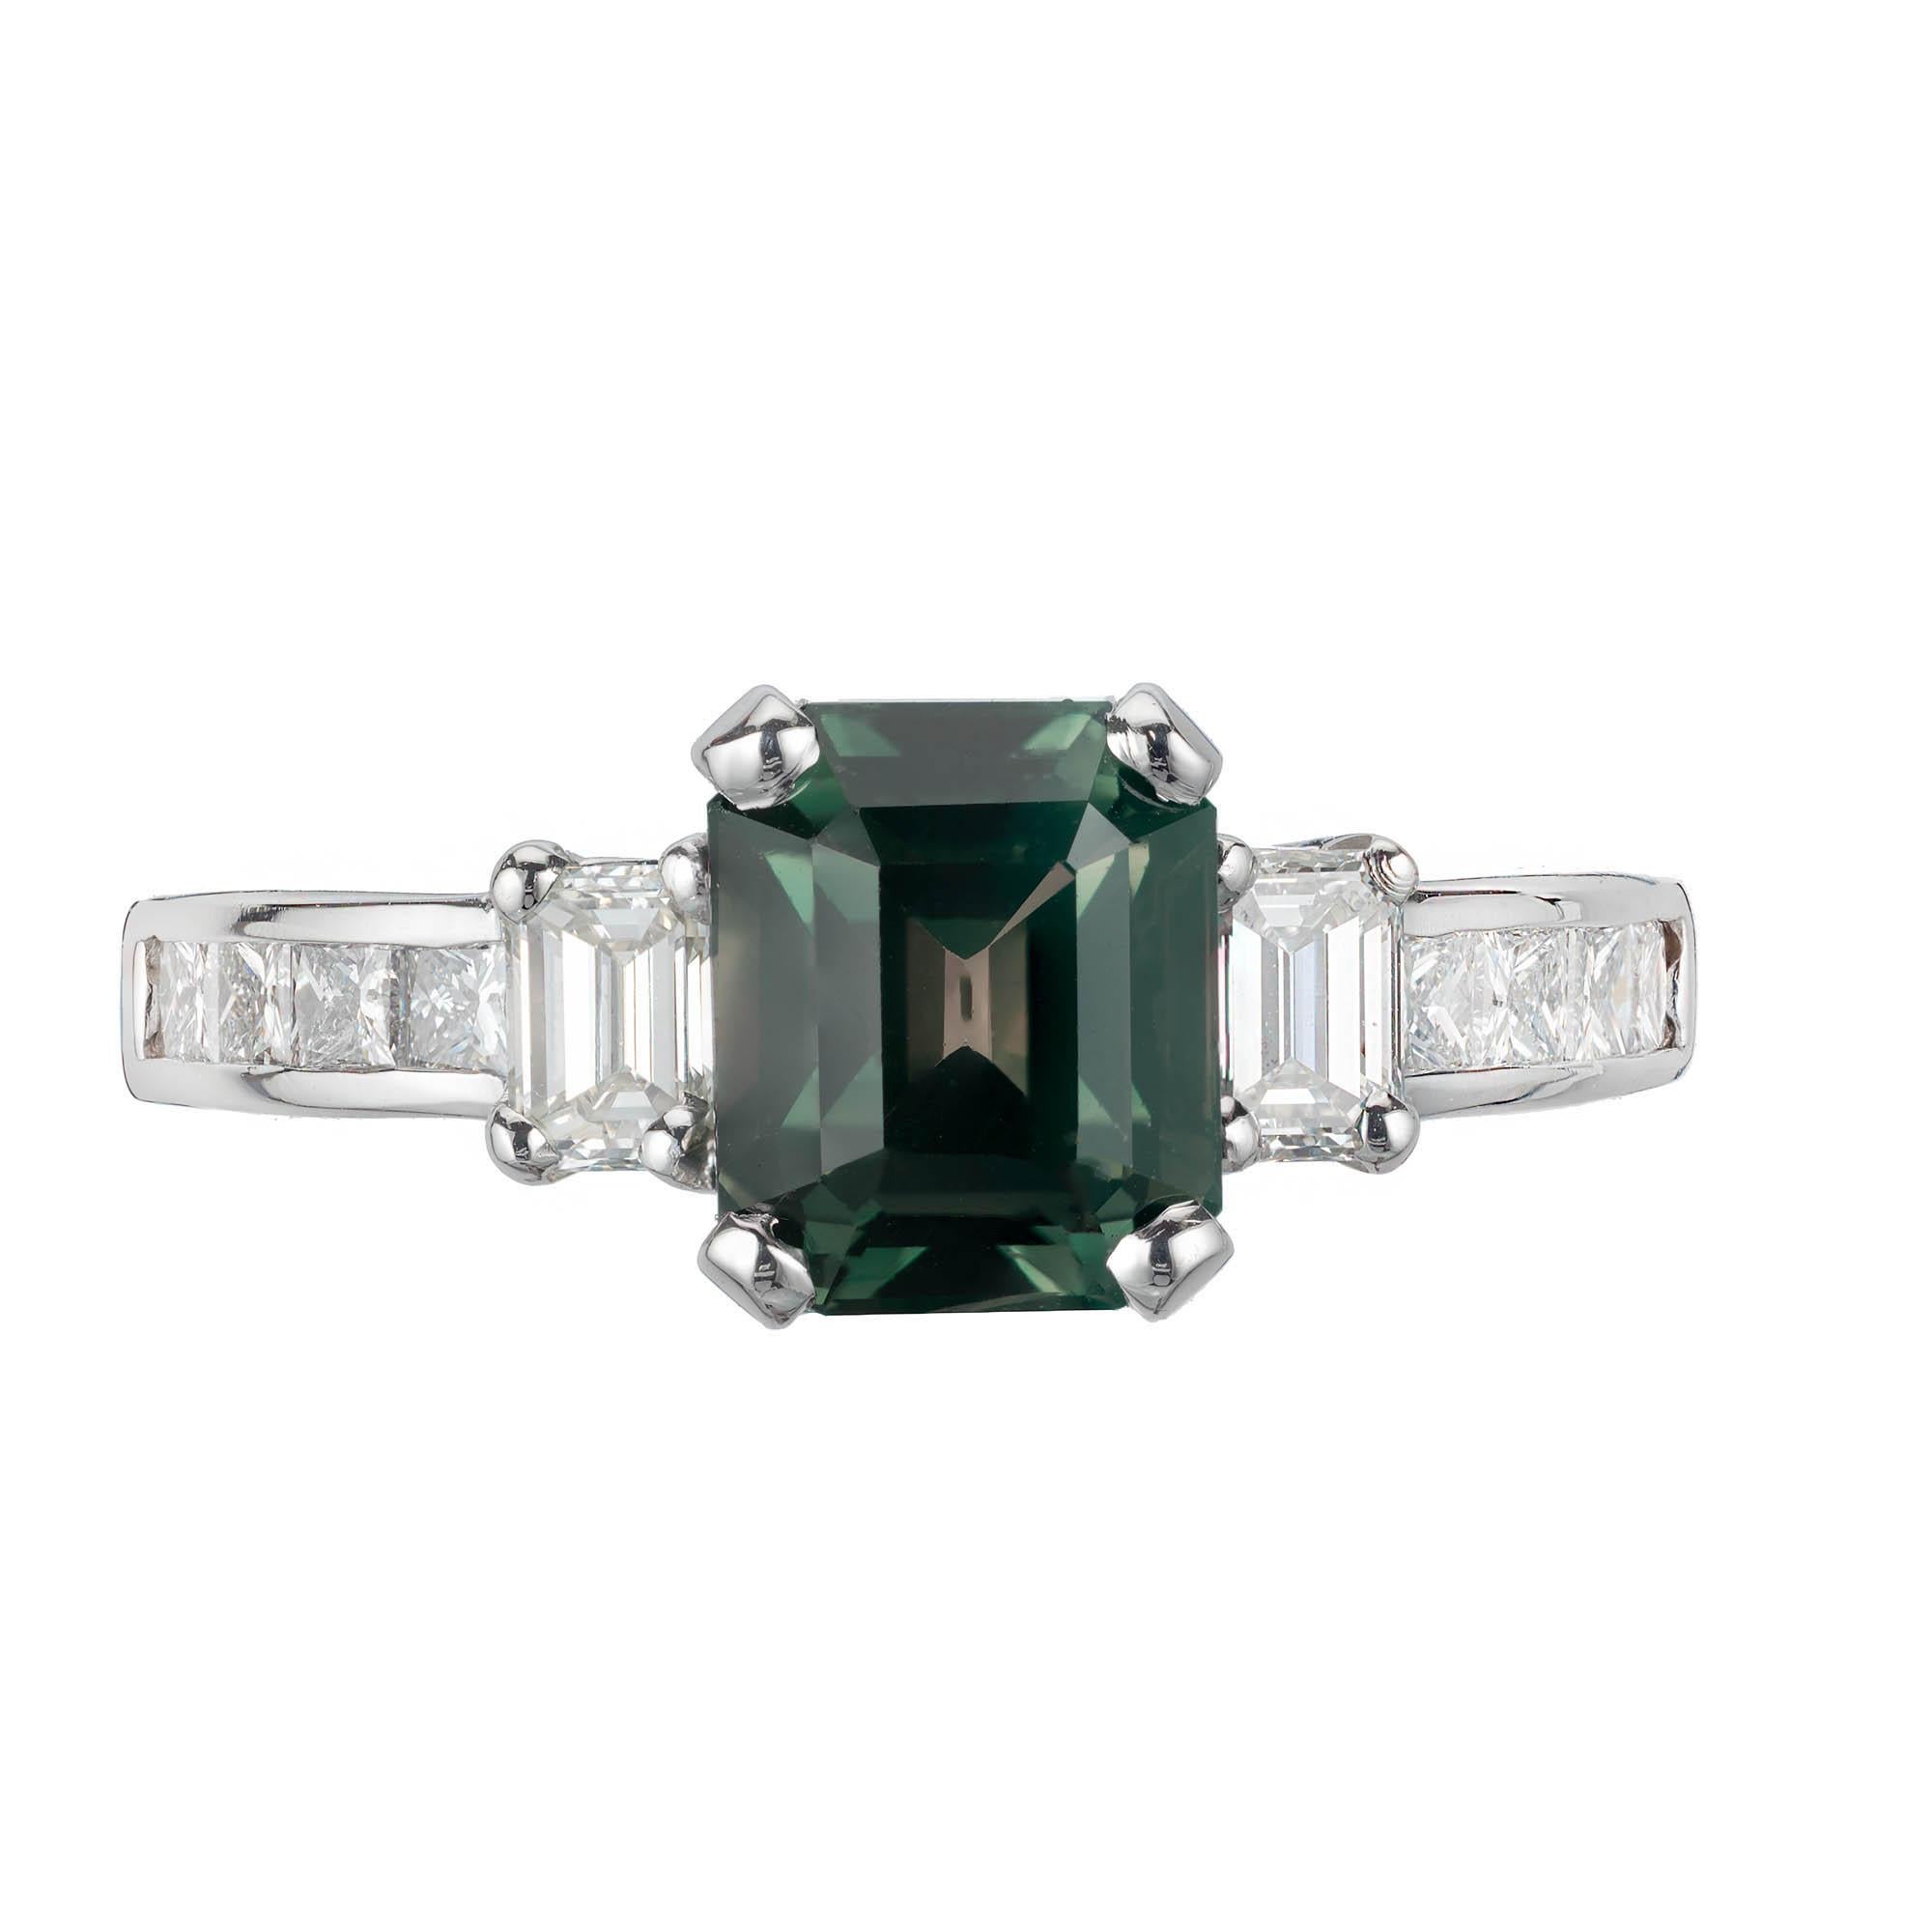 Peter Suchy sapphire and diamond three-stone engagement ring. The GIA Certified octagonal center stone is from an 1920's estate, accented with two emerald and eight princess cut diamonds, in a platinum setting designed by the Peter Suchy